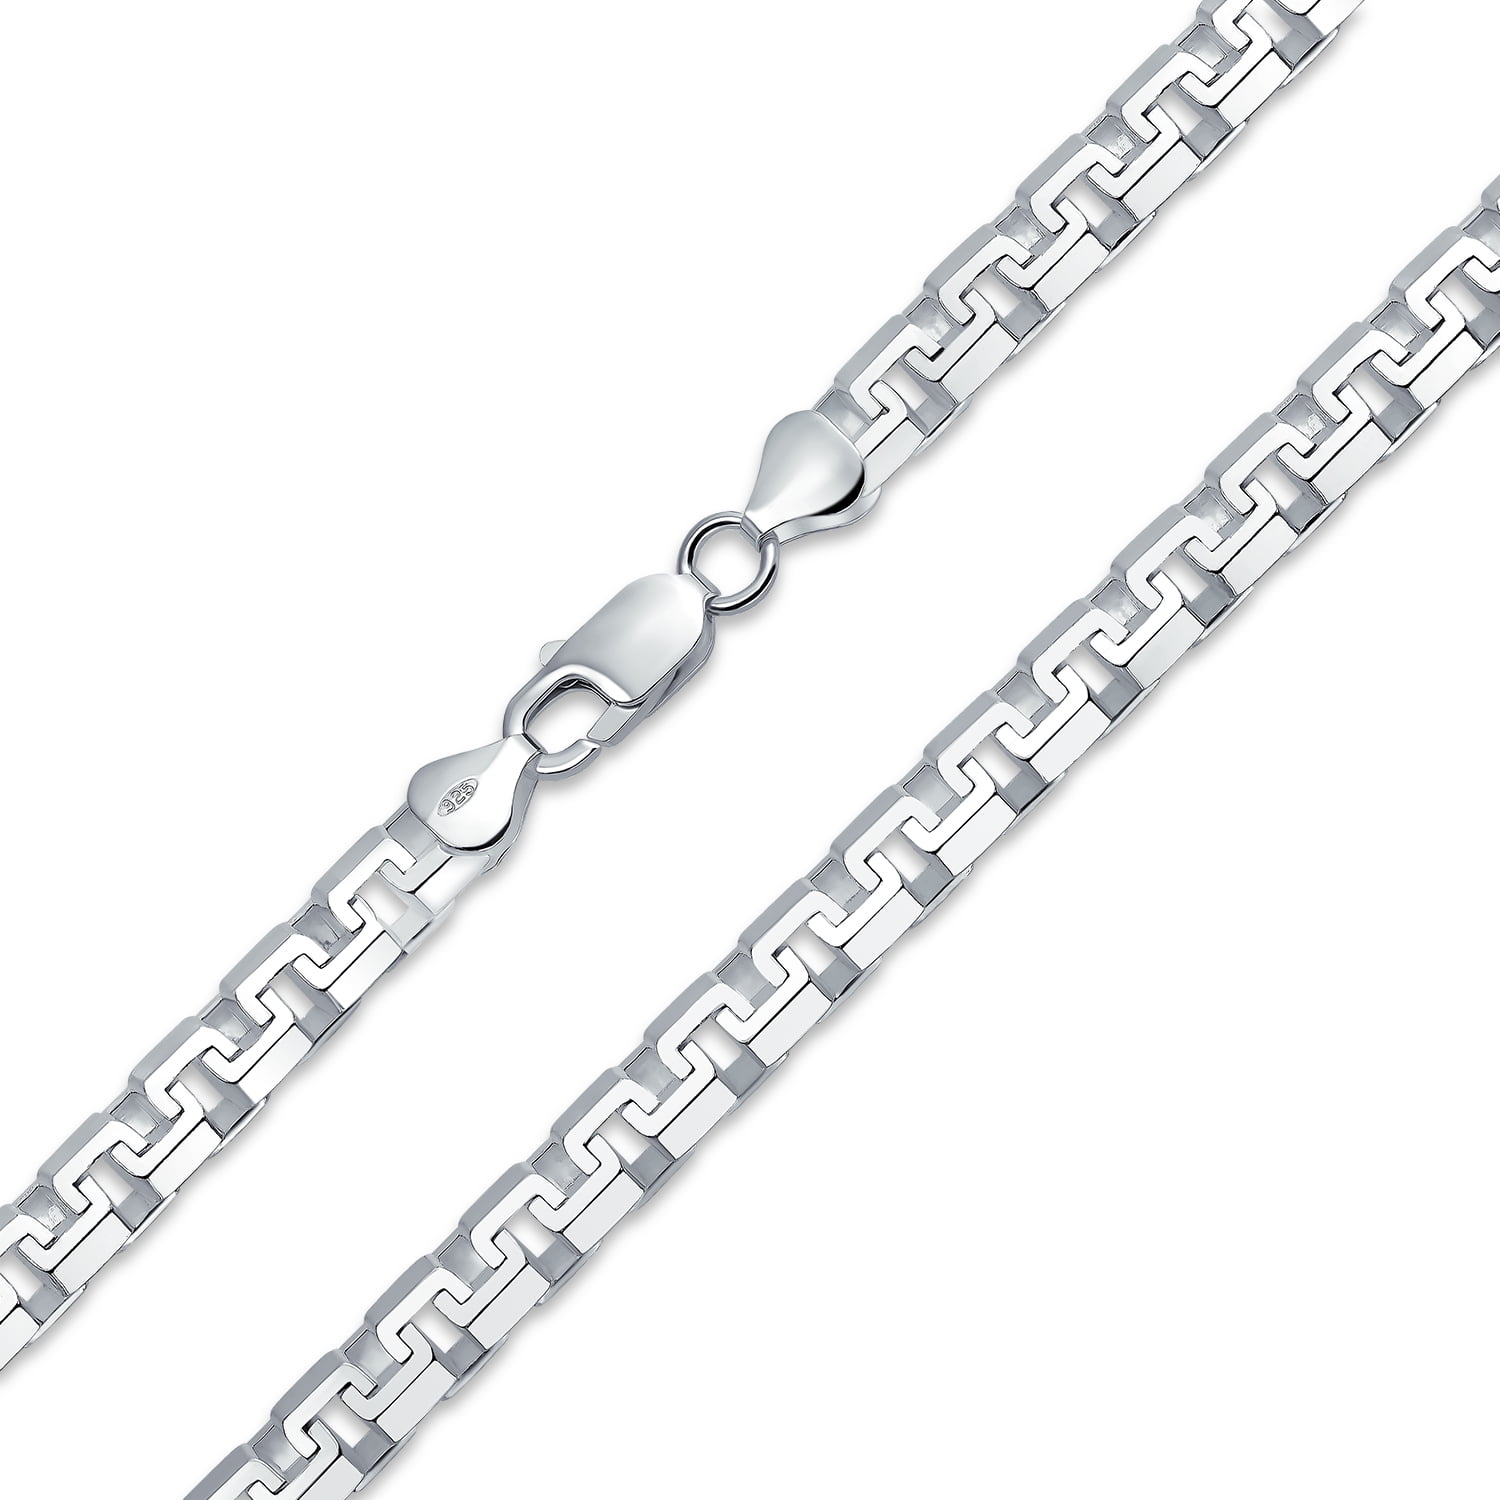 Roman Links 925 Sterling Silver Necklace Chain for Men All Lengths